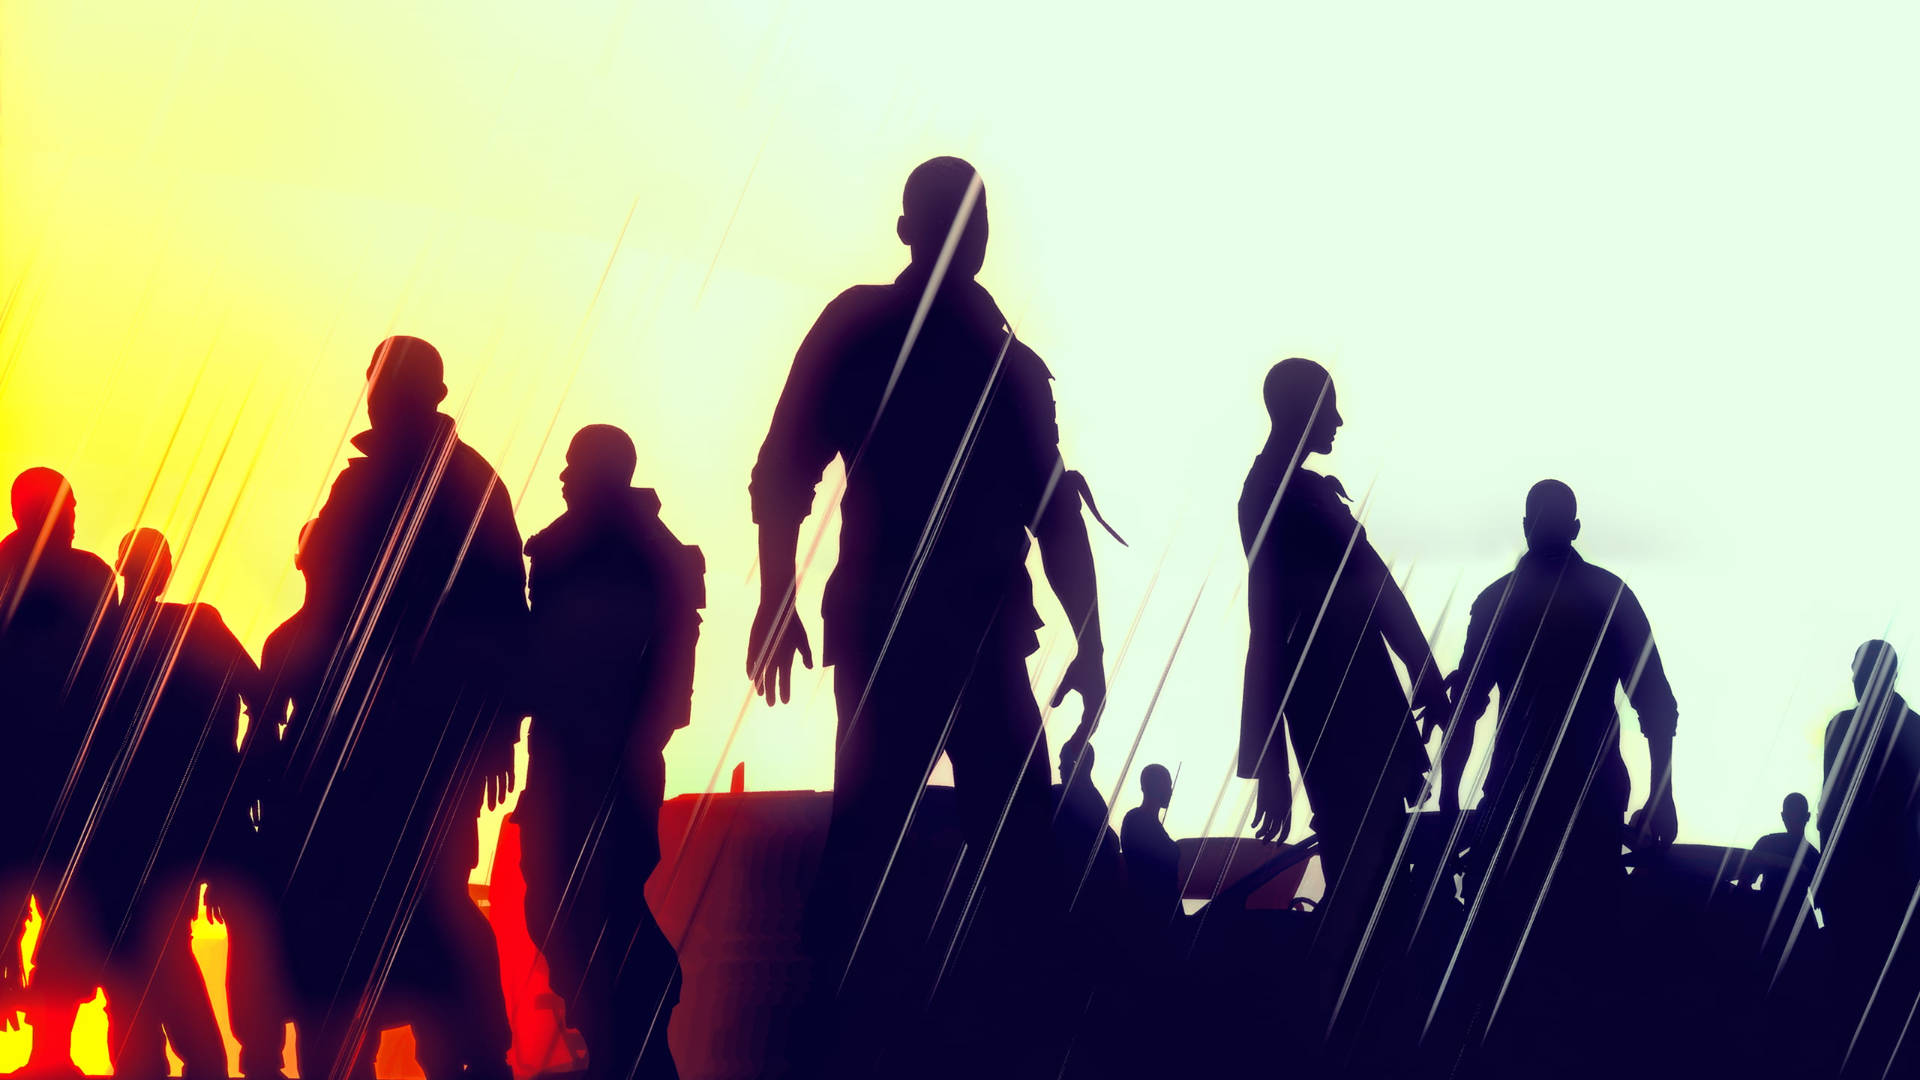 Dying Light Zombie Silhouettes Background